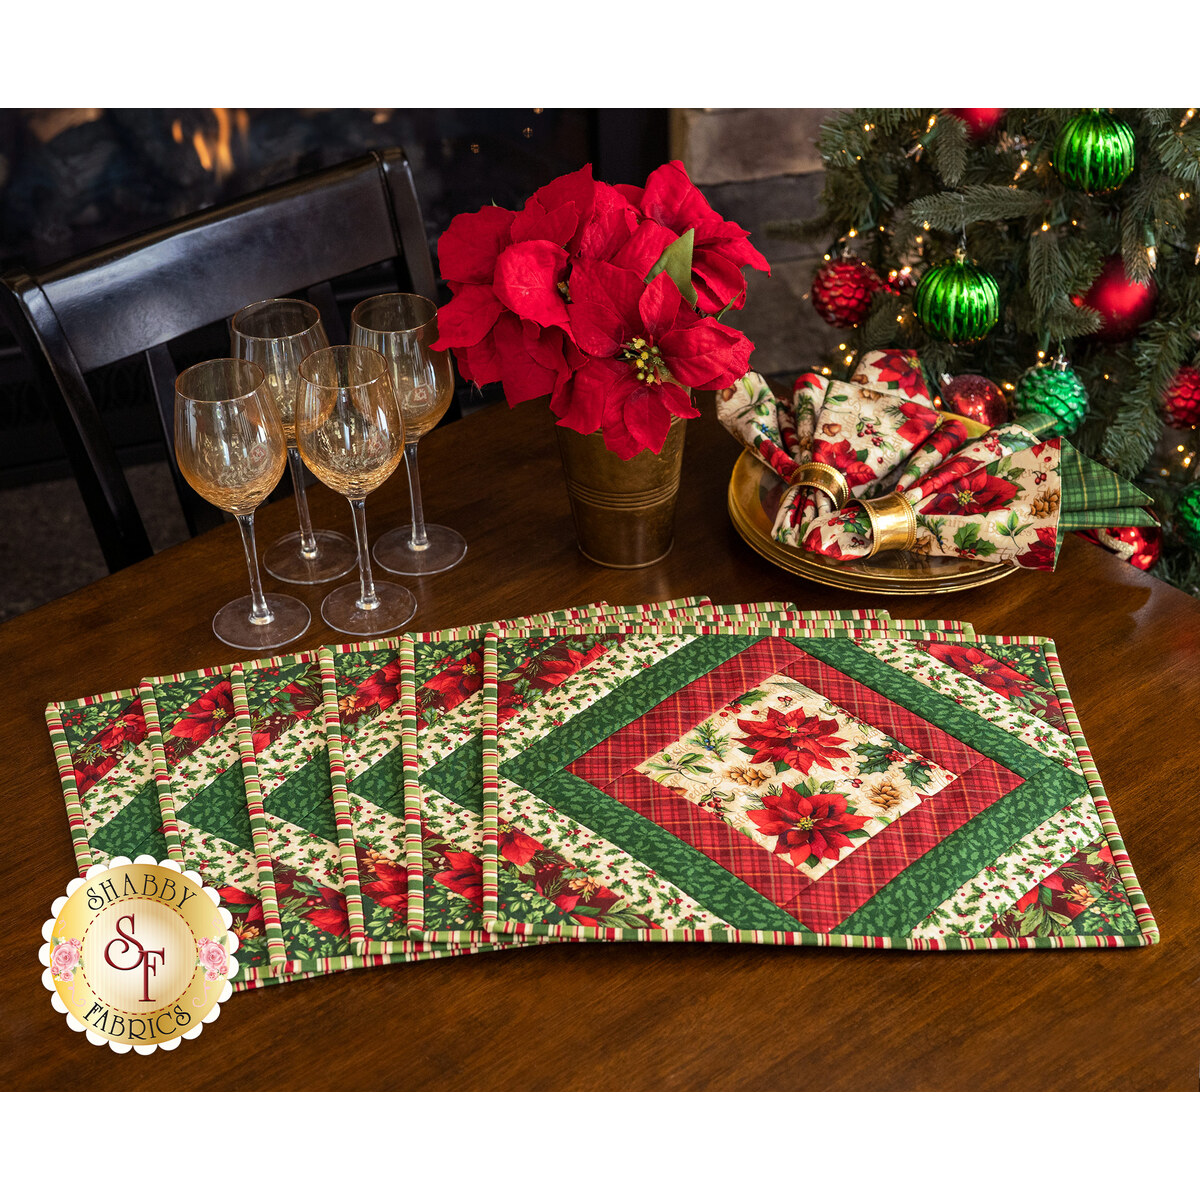 Quilt As You Go Casablanca Placemats Kit - Postcard Holiday - Makes 6